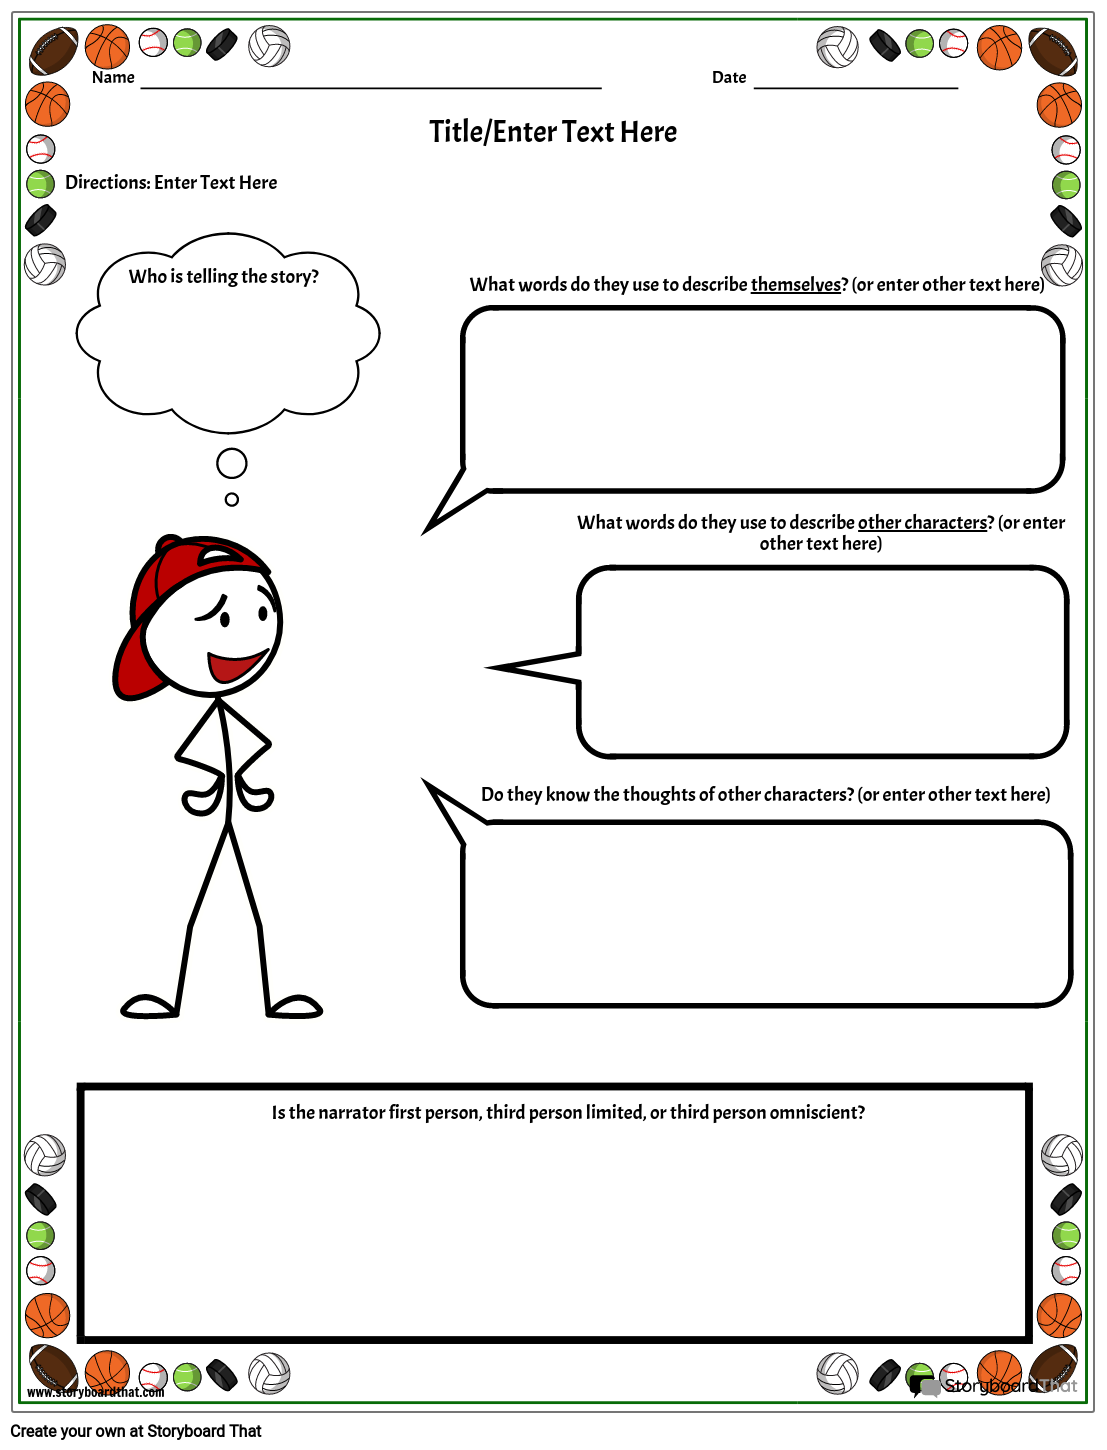 point-of-view-template-2-storyboard-by-worksheet-templates